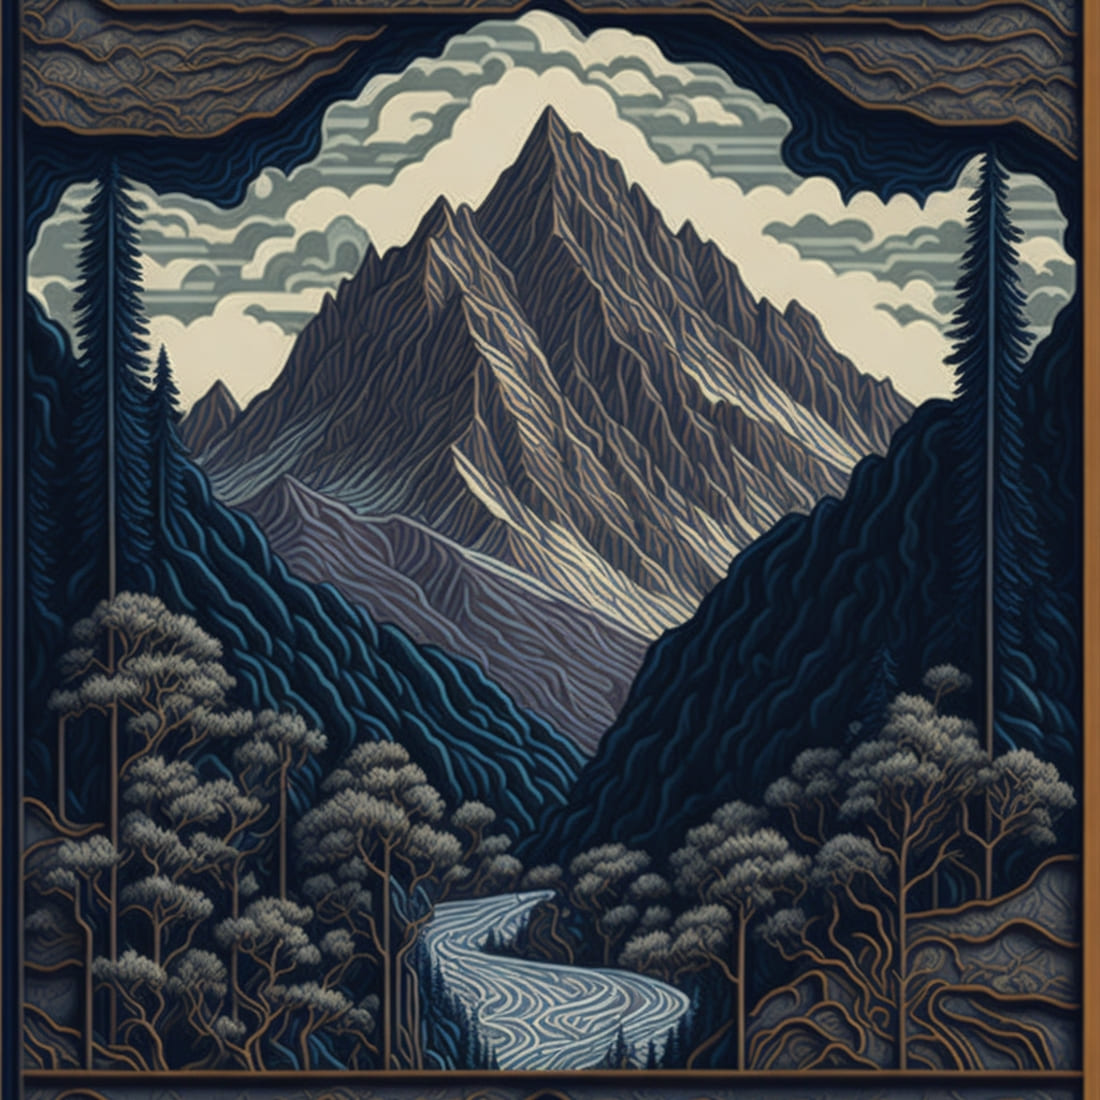 Retro Mountain Outline and shades of Art cover image.